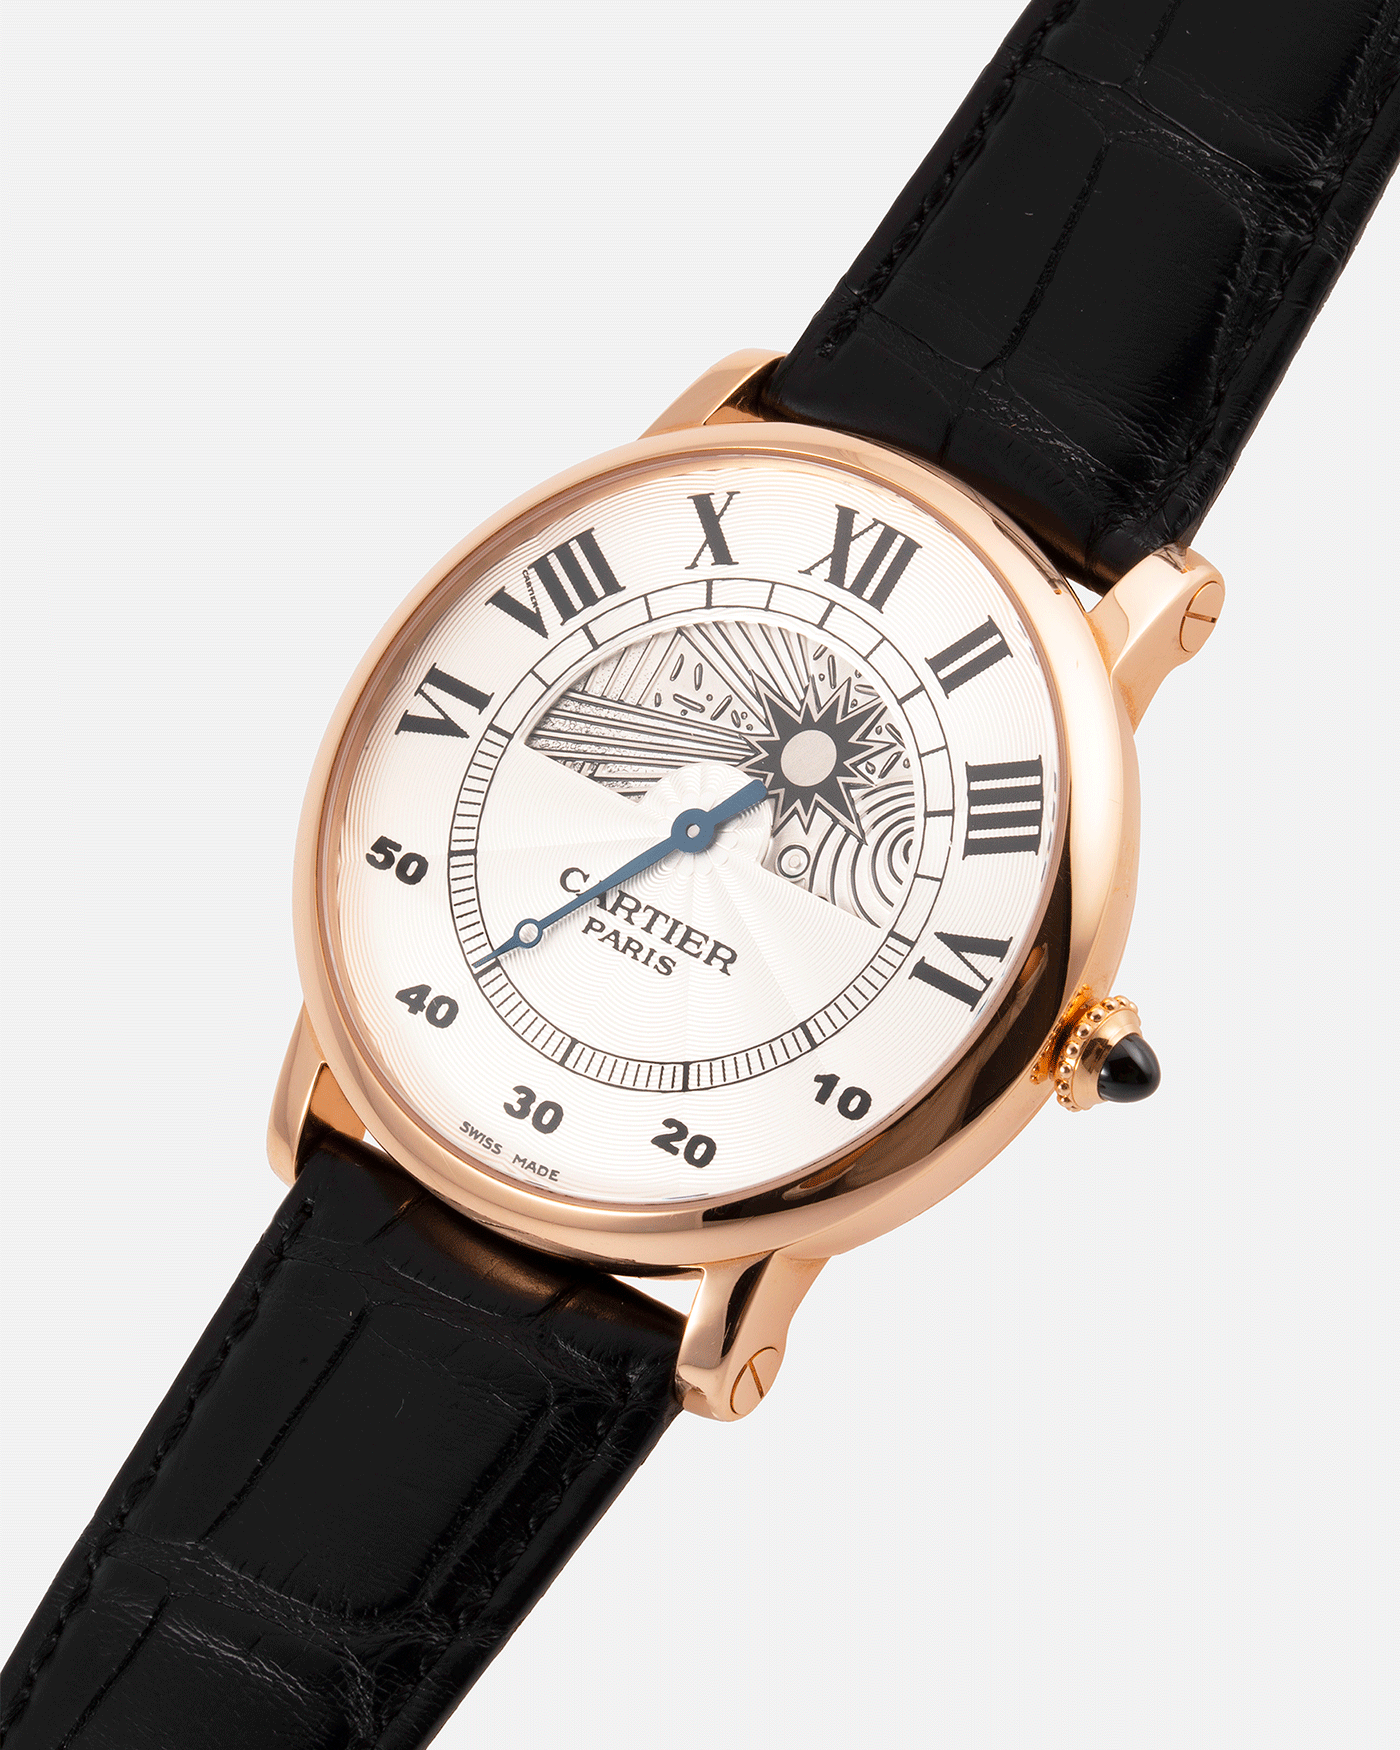 Brand: Cartier Year: 2000’s Model: CPCP Rotonde Jour Et Nuit Reference: 28721 Material: 18k Rose Gold Movement: Cal. 9903 MC Case Diameter: 42mm Strap: Black Cartier Alligator Strap with 18k Rose Gold Deployant